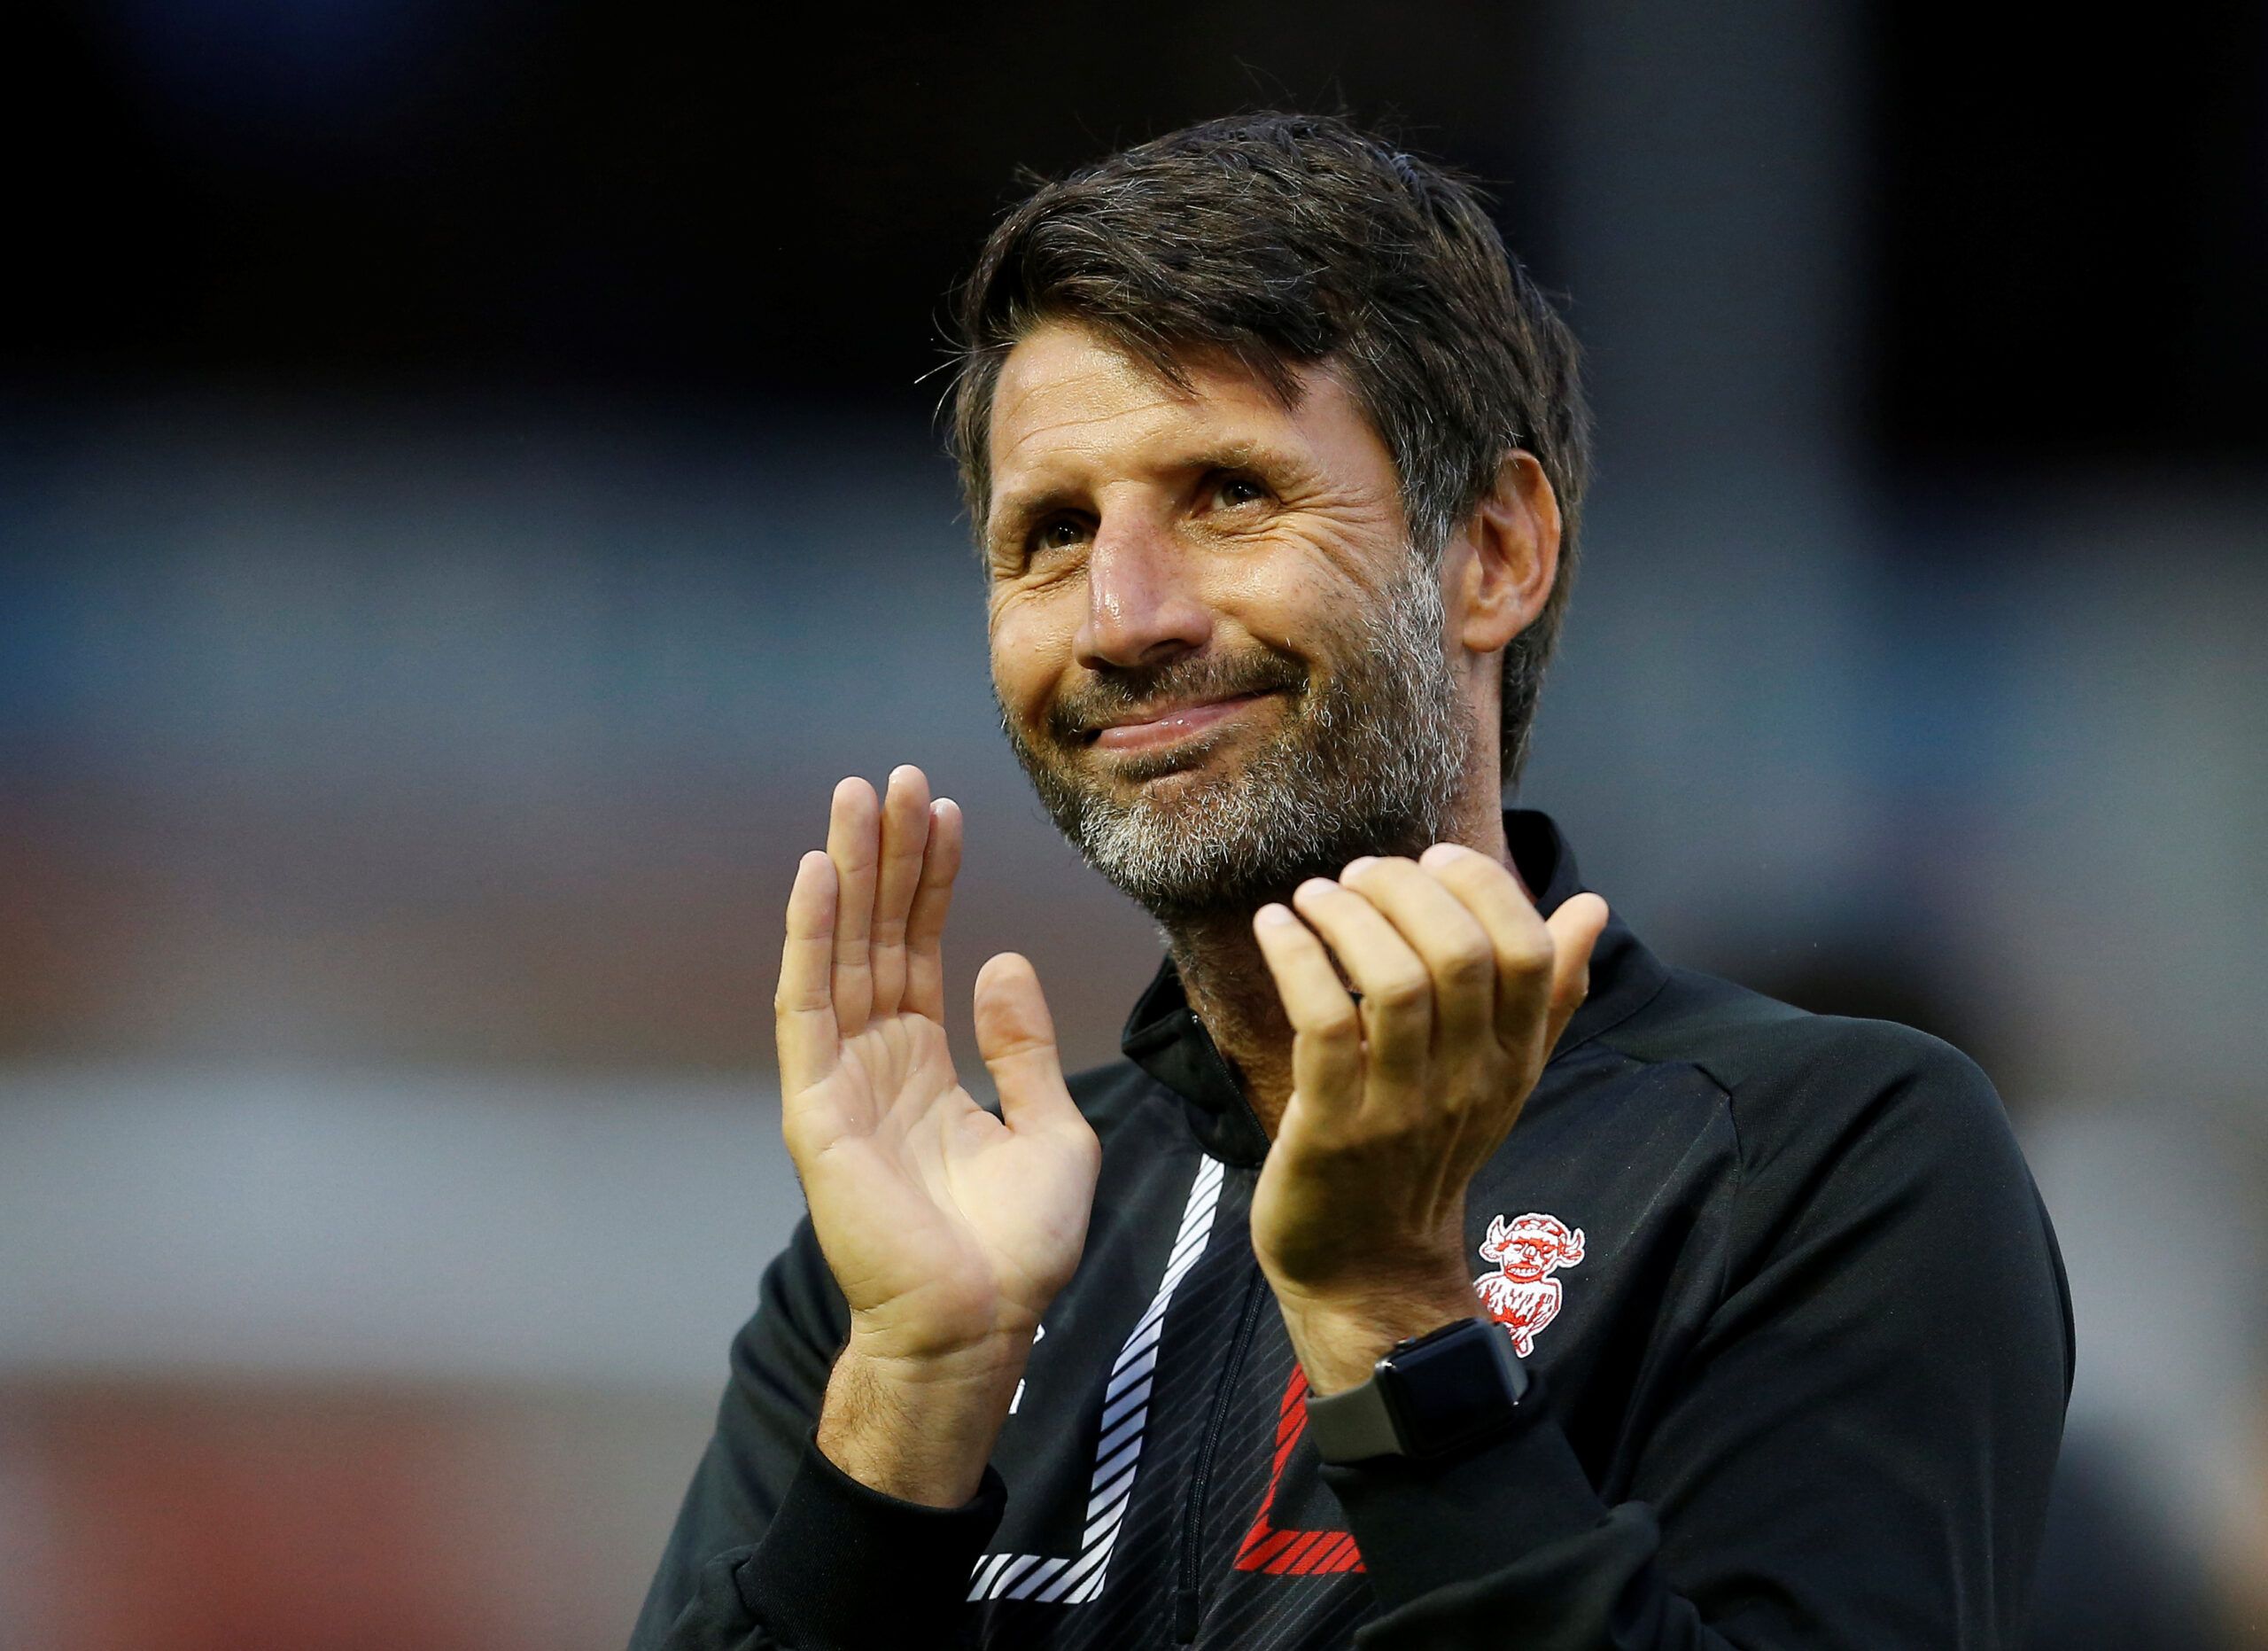 Soccer Football - Carabao Cup Second Round -  Lincoln City v Everton - Sincil Bank Stadium, Lincoln, Britain - August 28, 2019  Lincoln City manager Danny Cowley before the match     Action Images via Reuters/Craig Brough  EDITORIAL USE ONLY. No use with unauthorized audio, video, data, fixture lists, club/league logos or 